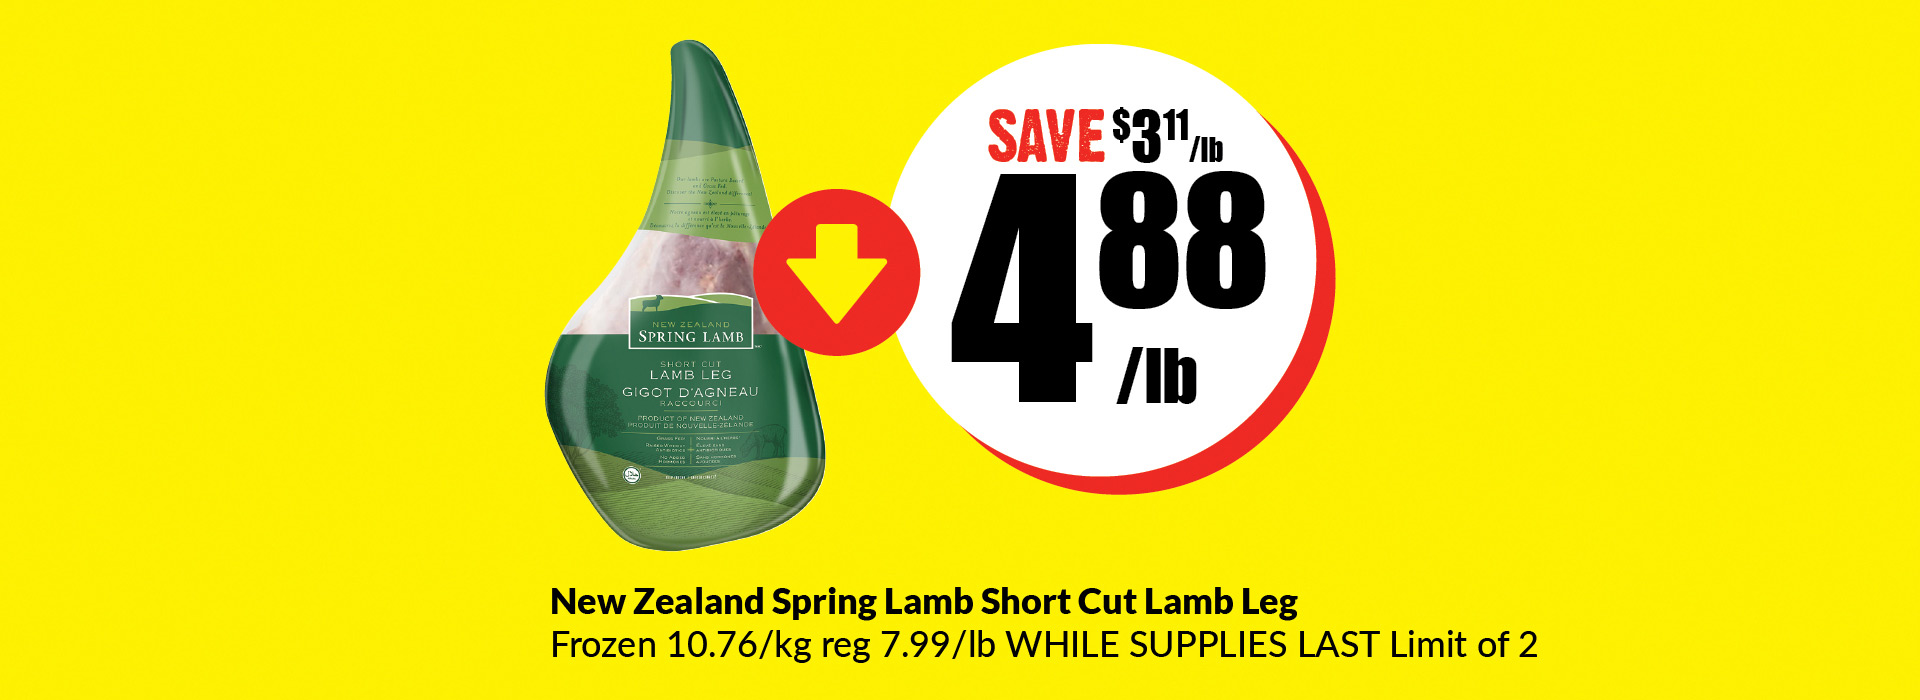 Text Reading “Buy New Zealand Spring Lamb Short Cut Lamb Leg Frozen 10.76 per kg at $4.88 per pound and save $3.11 per pound. The regular price is $7.99 per pound. While supplies last limit of 2”